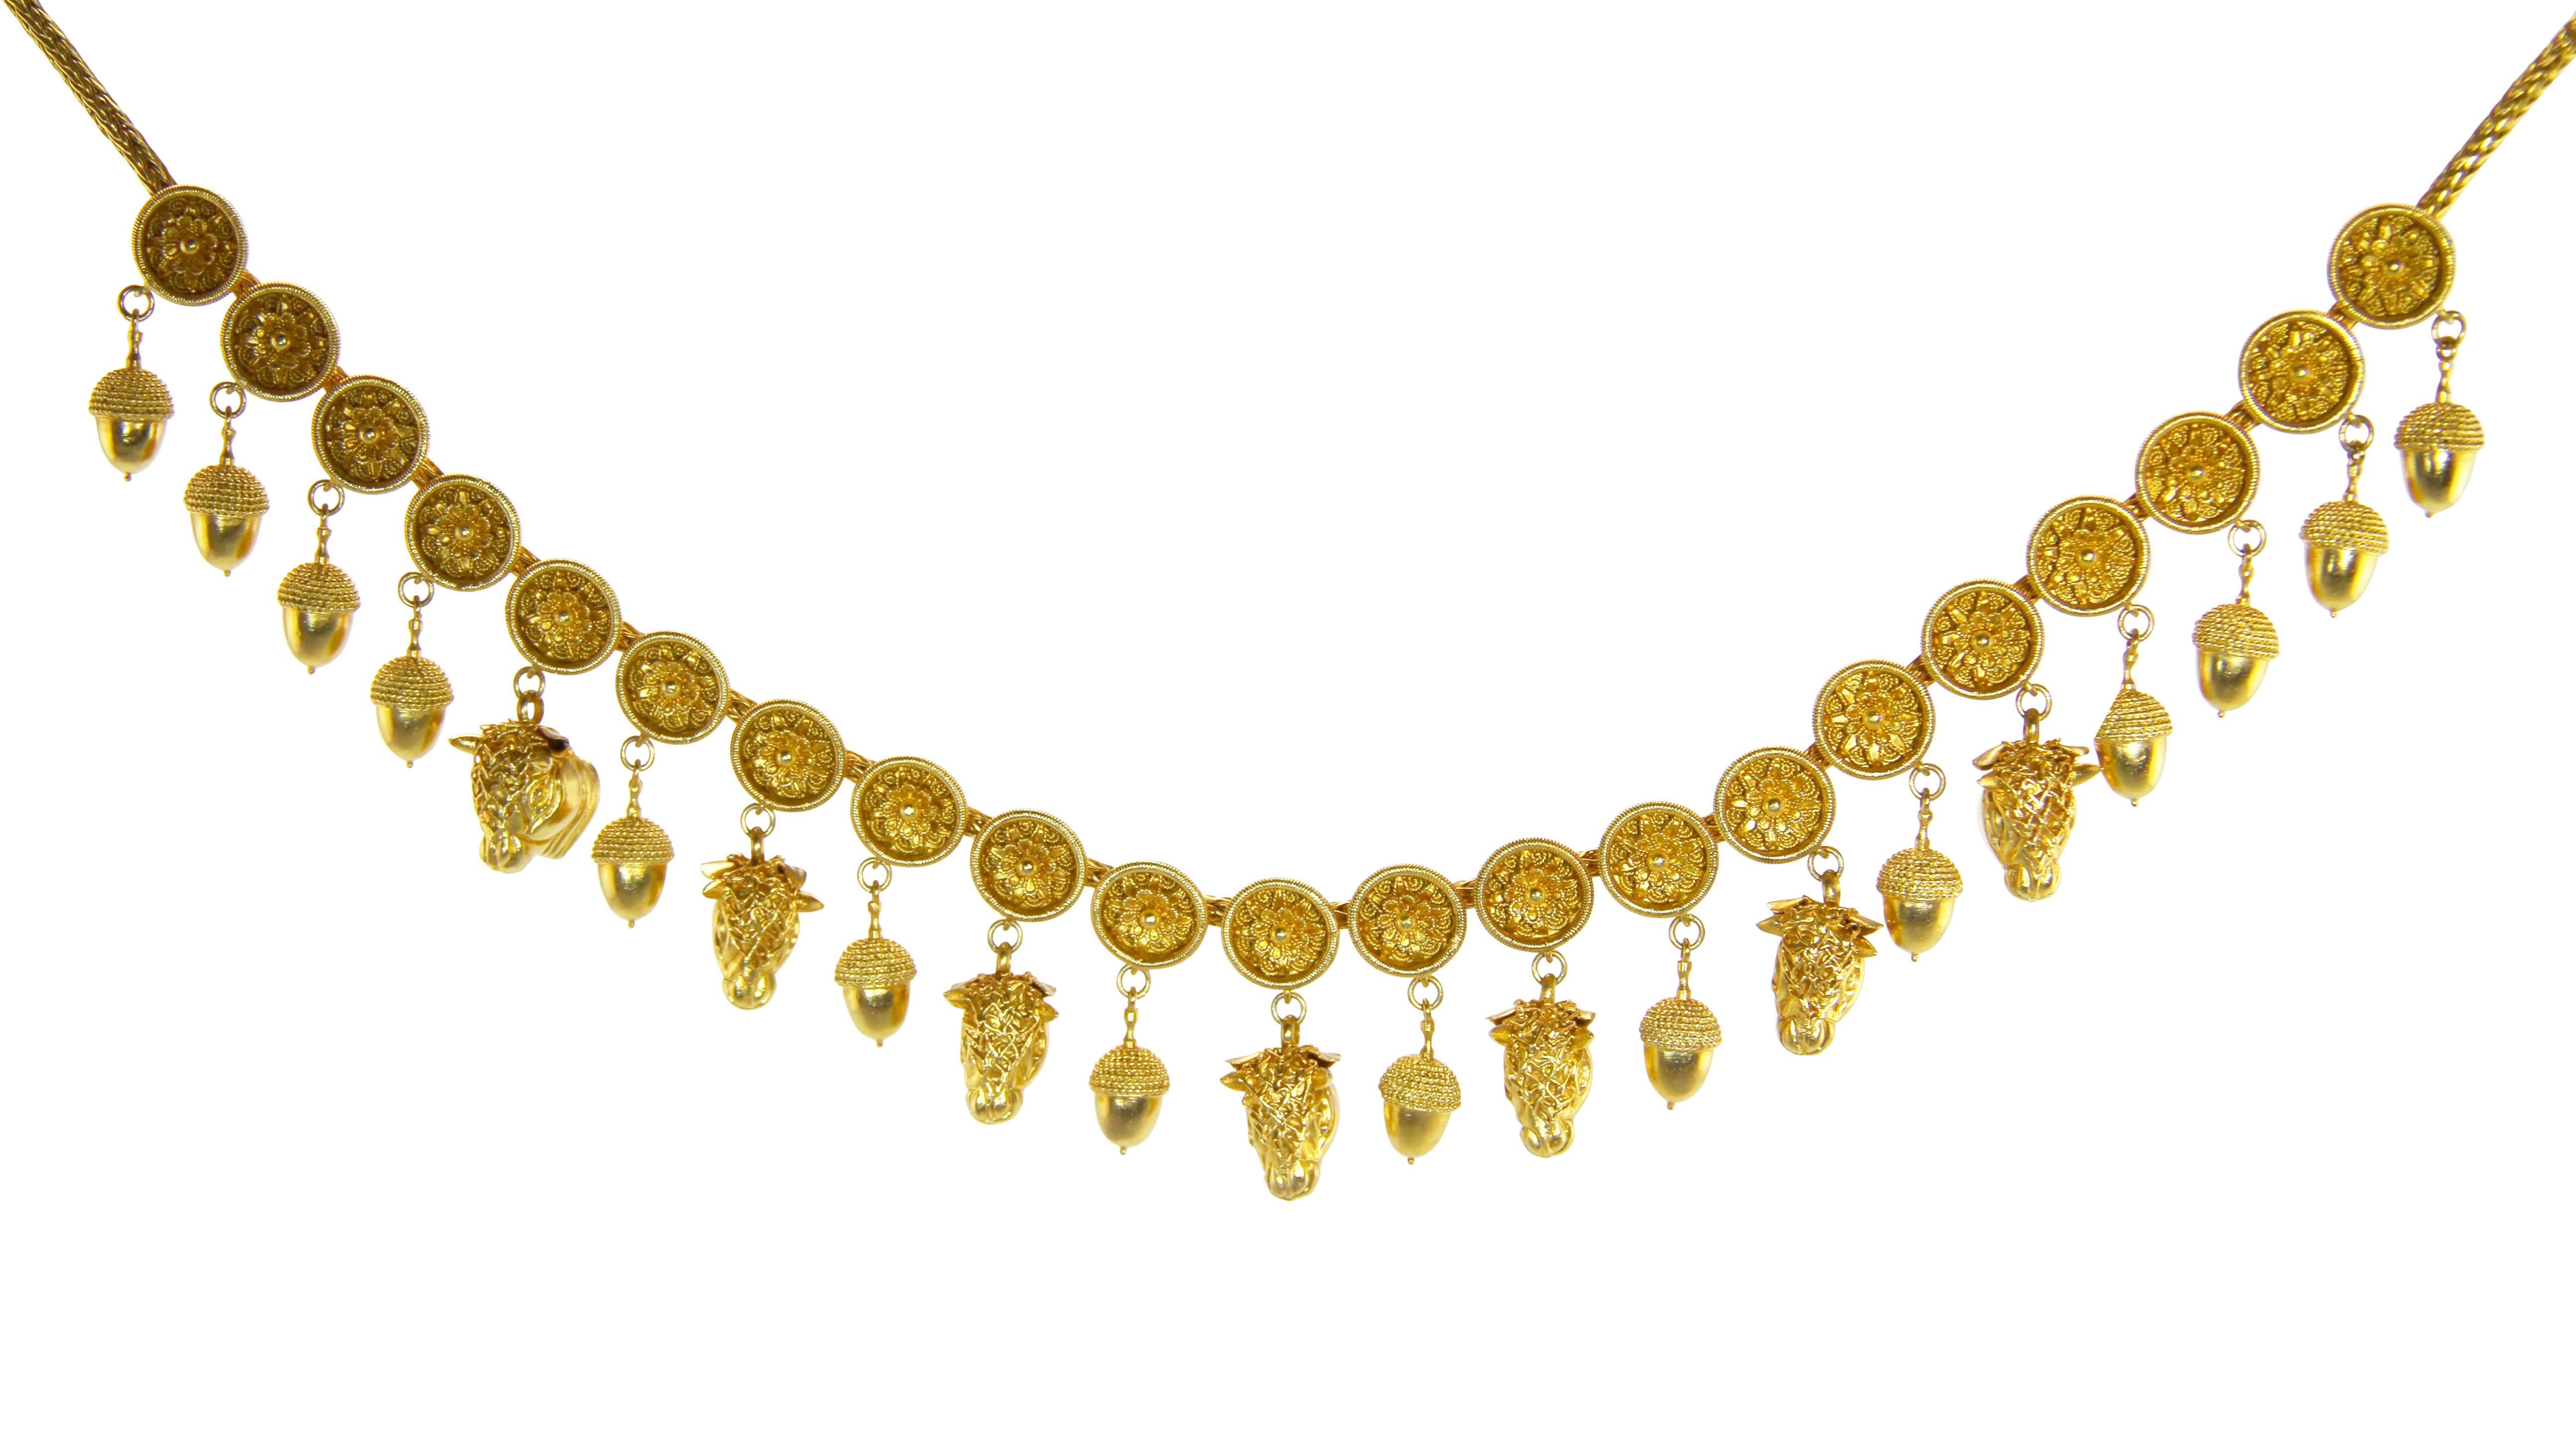 An 18 karat gold necklace by Lalaounis, Greece, designed as an alternating fringe of bullheads and acorns suspended from 21 circular floral medallions, completed by a rounded foxtail chain, length 16 inches, gross weight 89.8 grams, with maker's